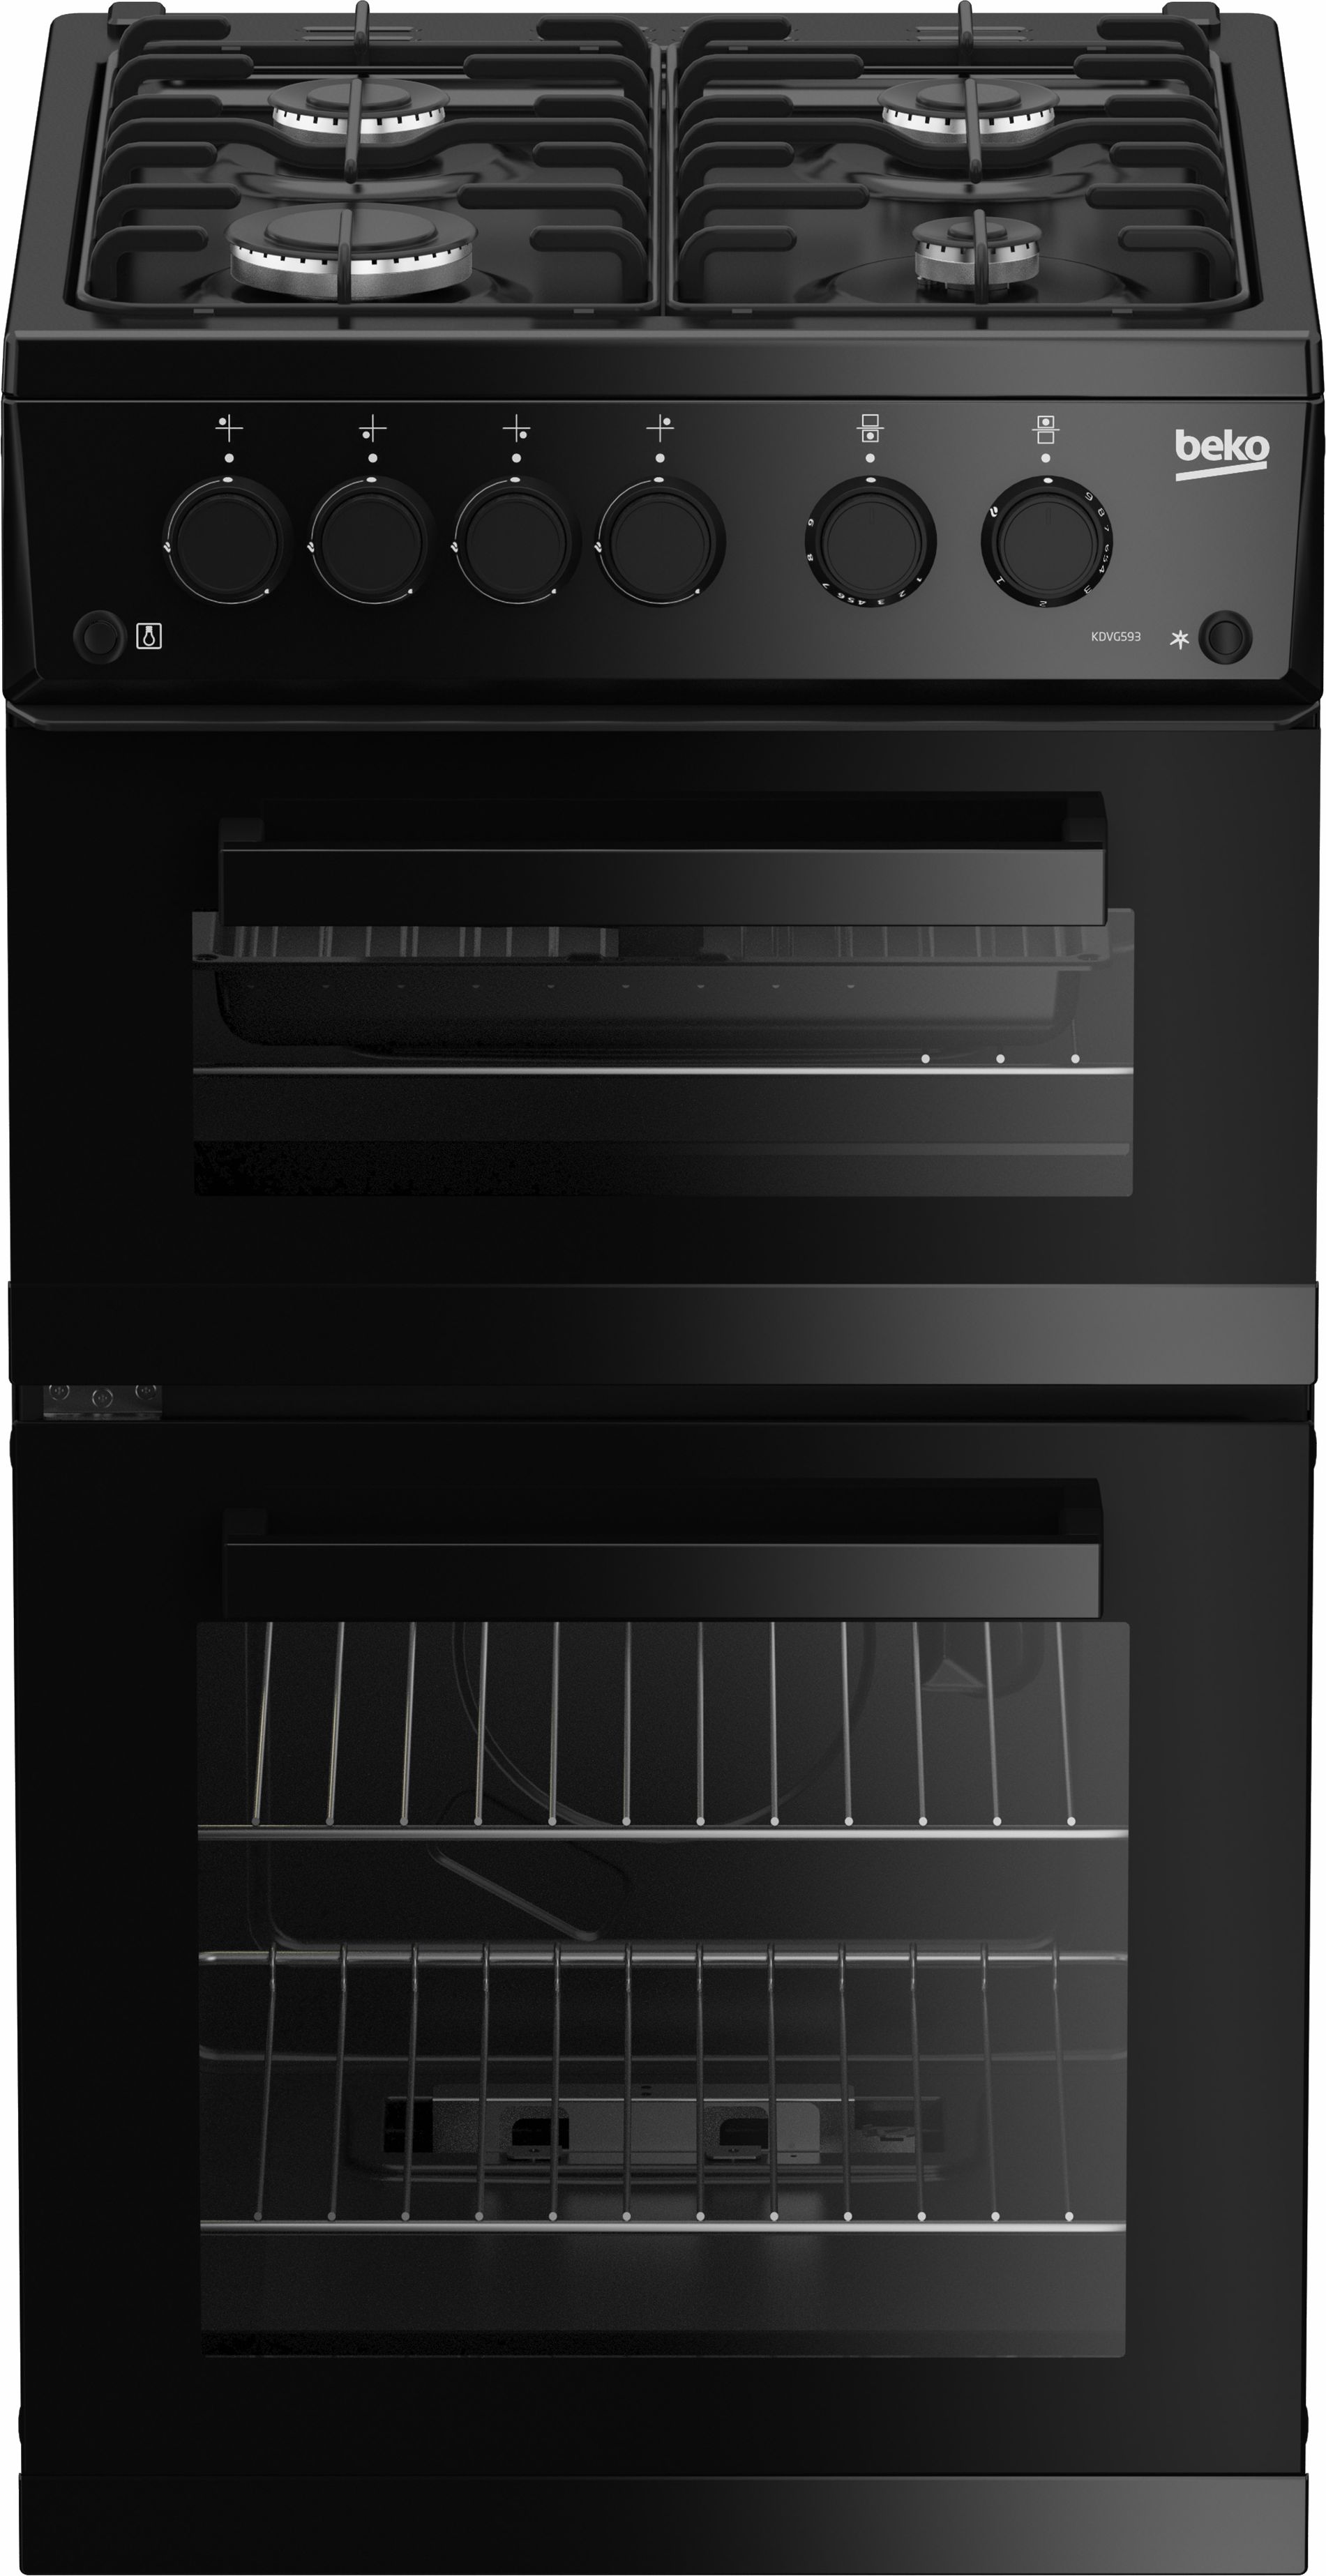 Beko KDVG593K 50cm Freestanding Gas Cooker with Gas Grill - Black - A+ Rated, Black